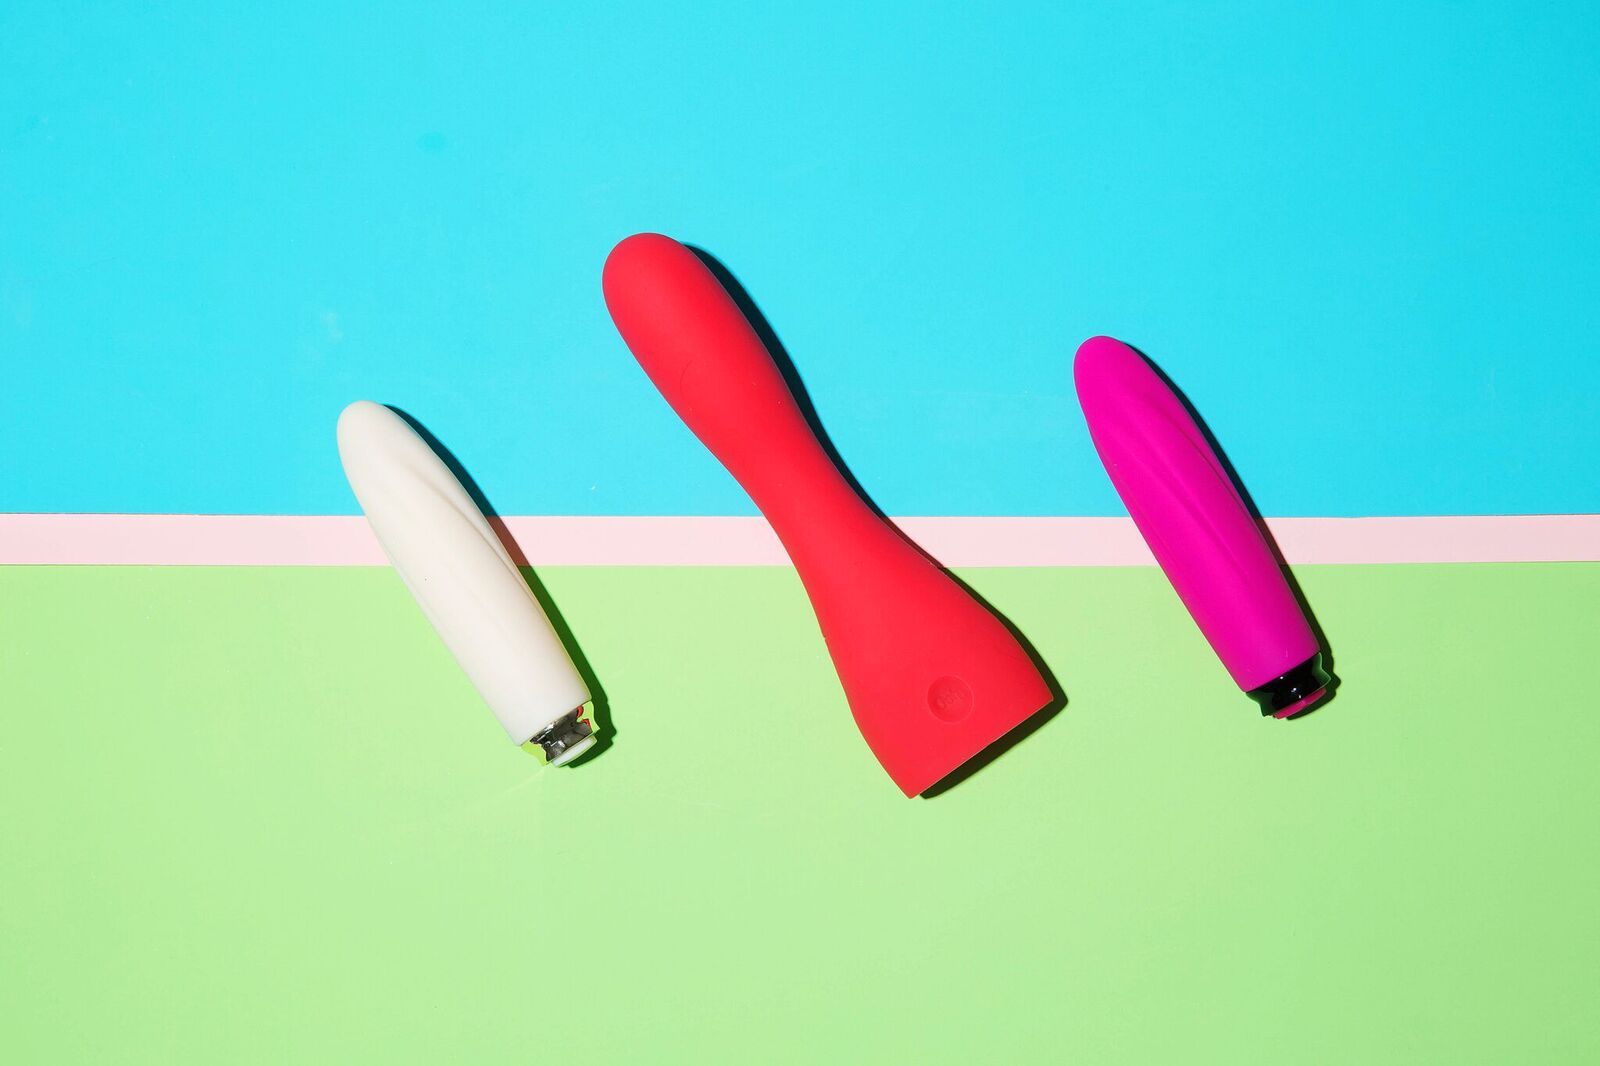 married couples and vibrator stories